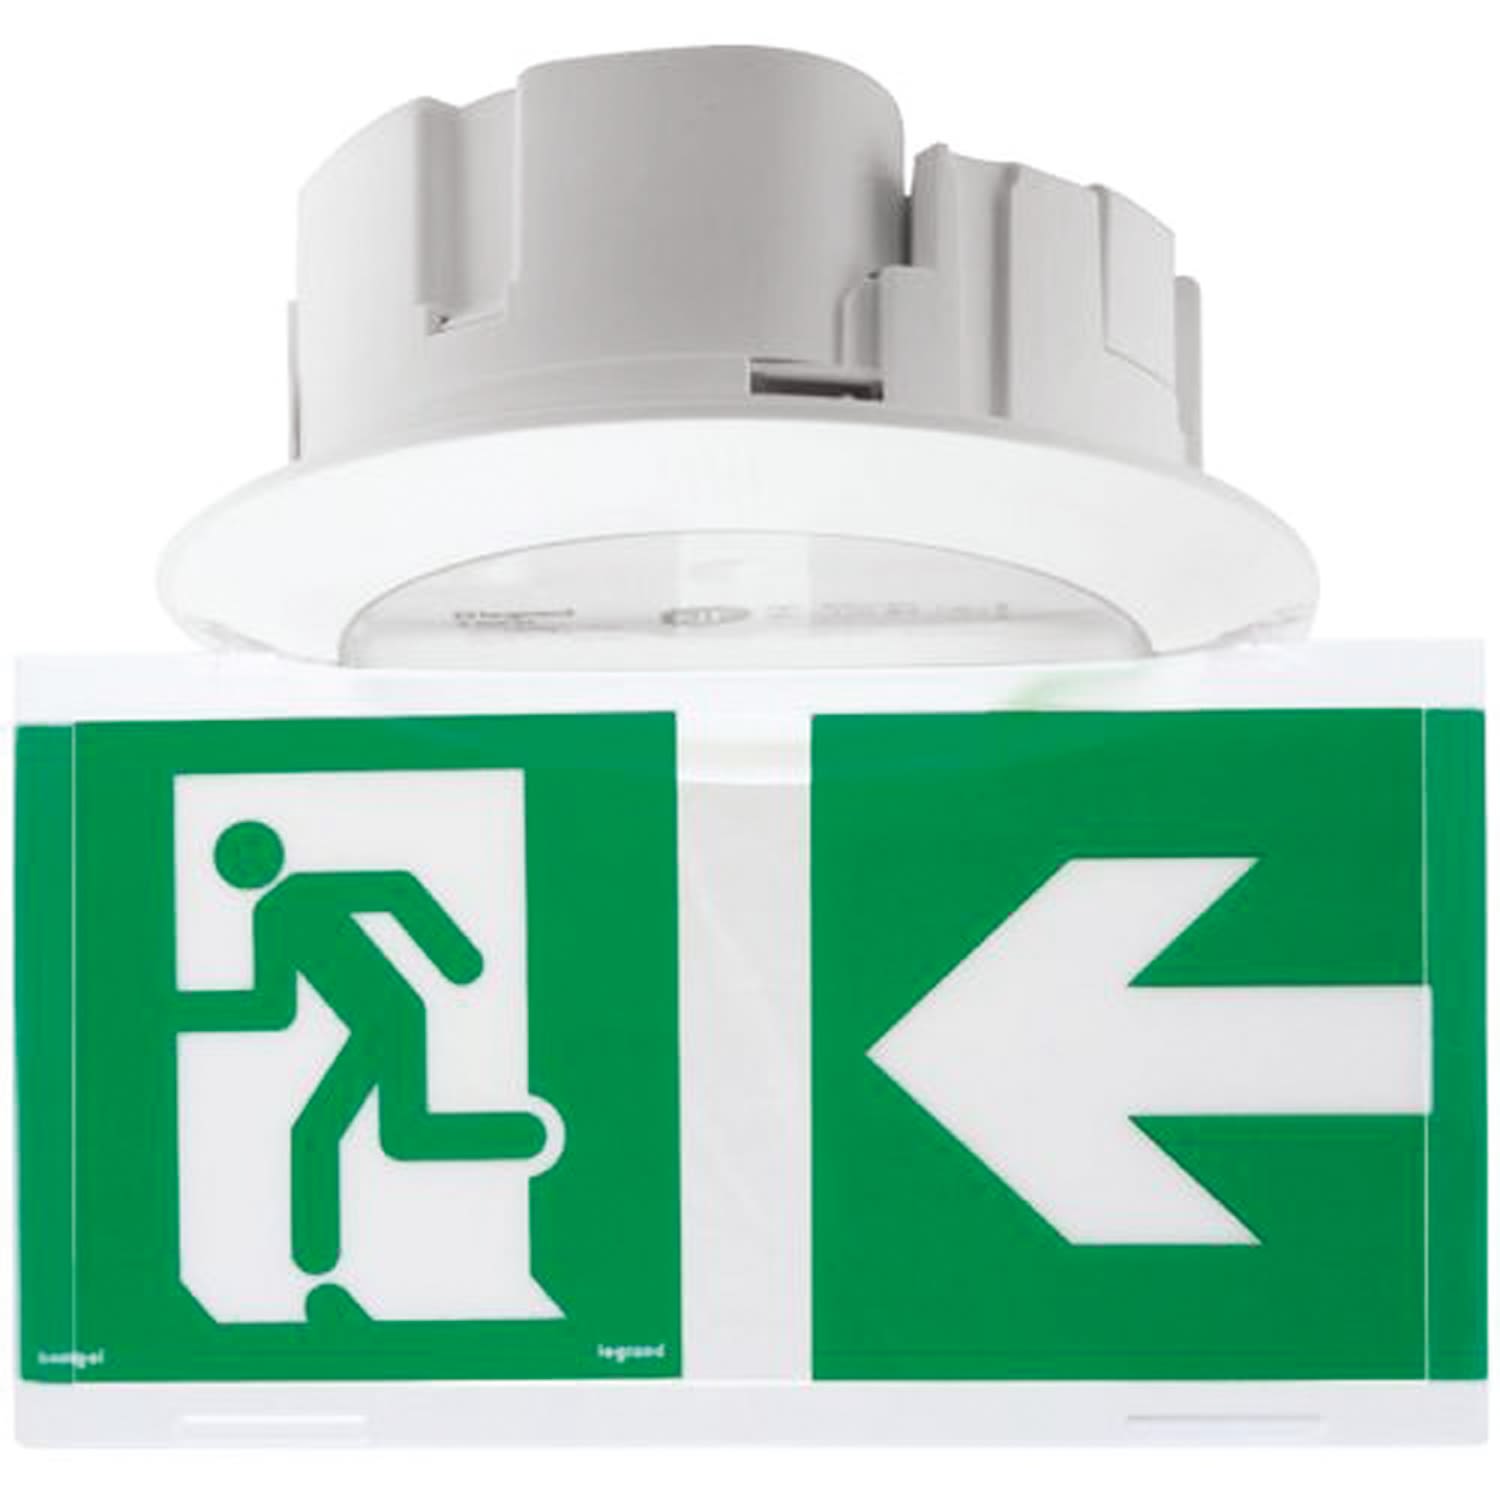 Legrand LED Emergency Lighting, Recessed, 0.7 W, Maintained